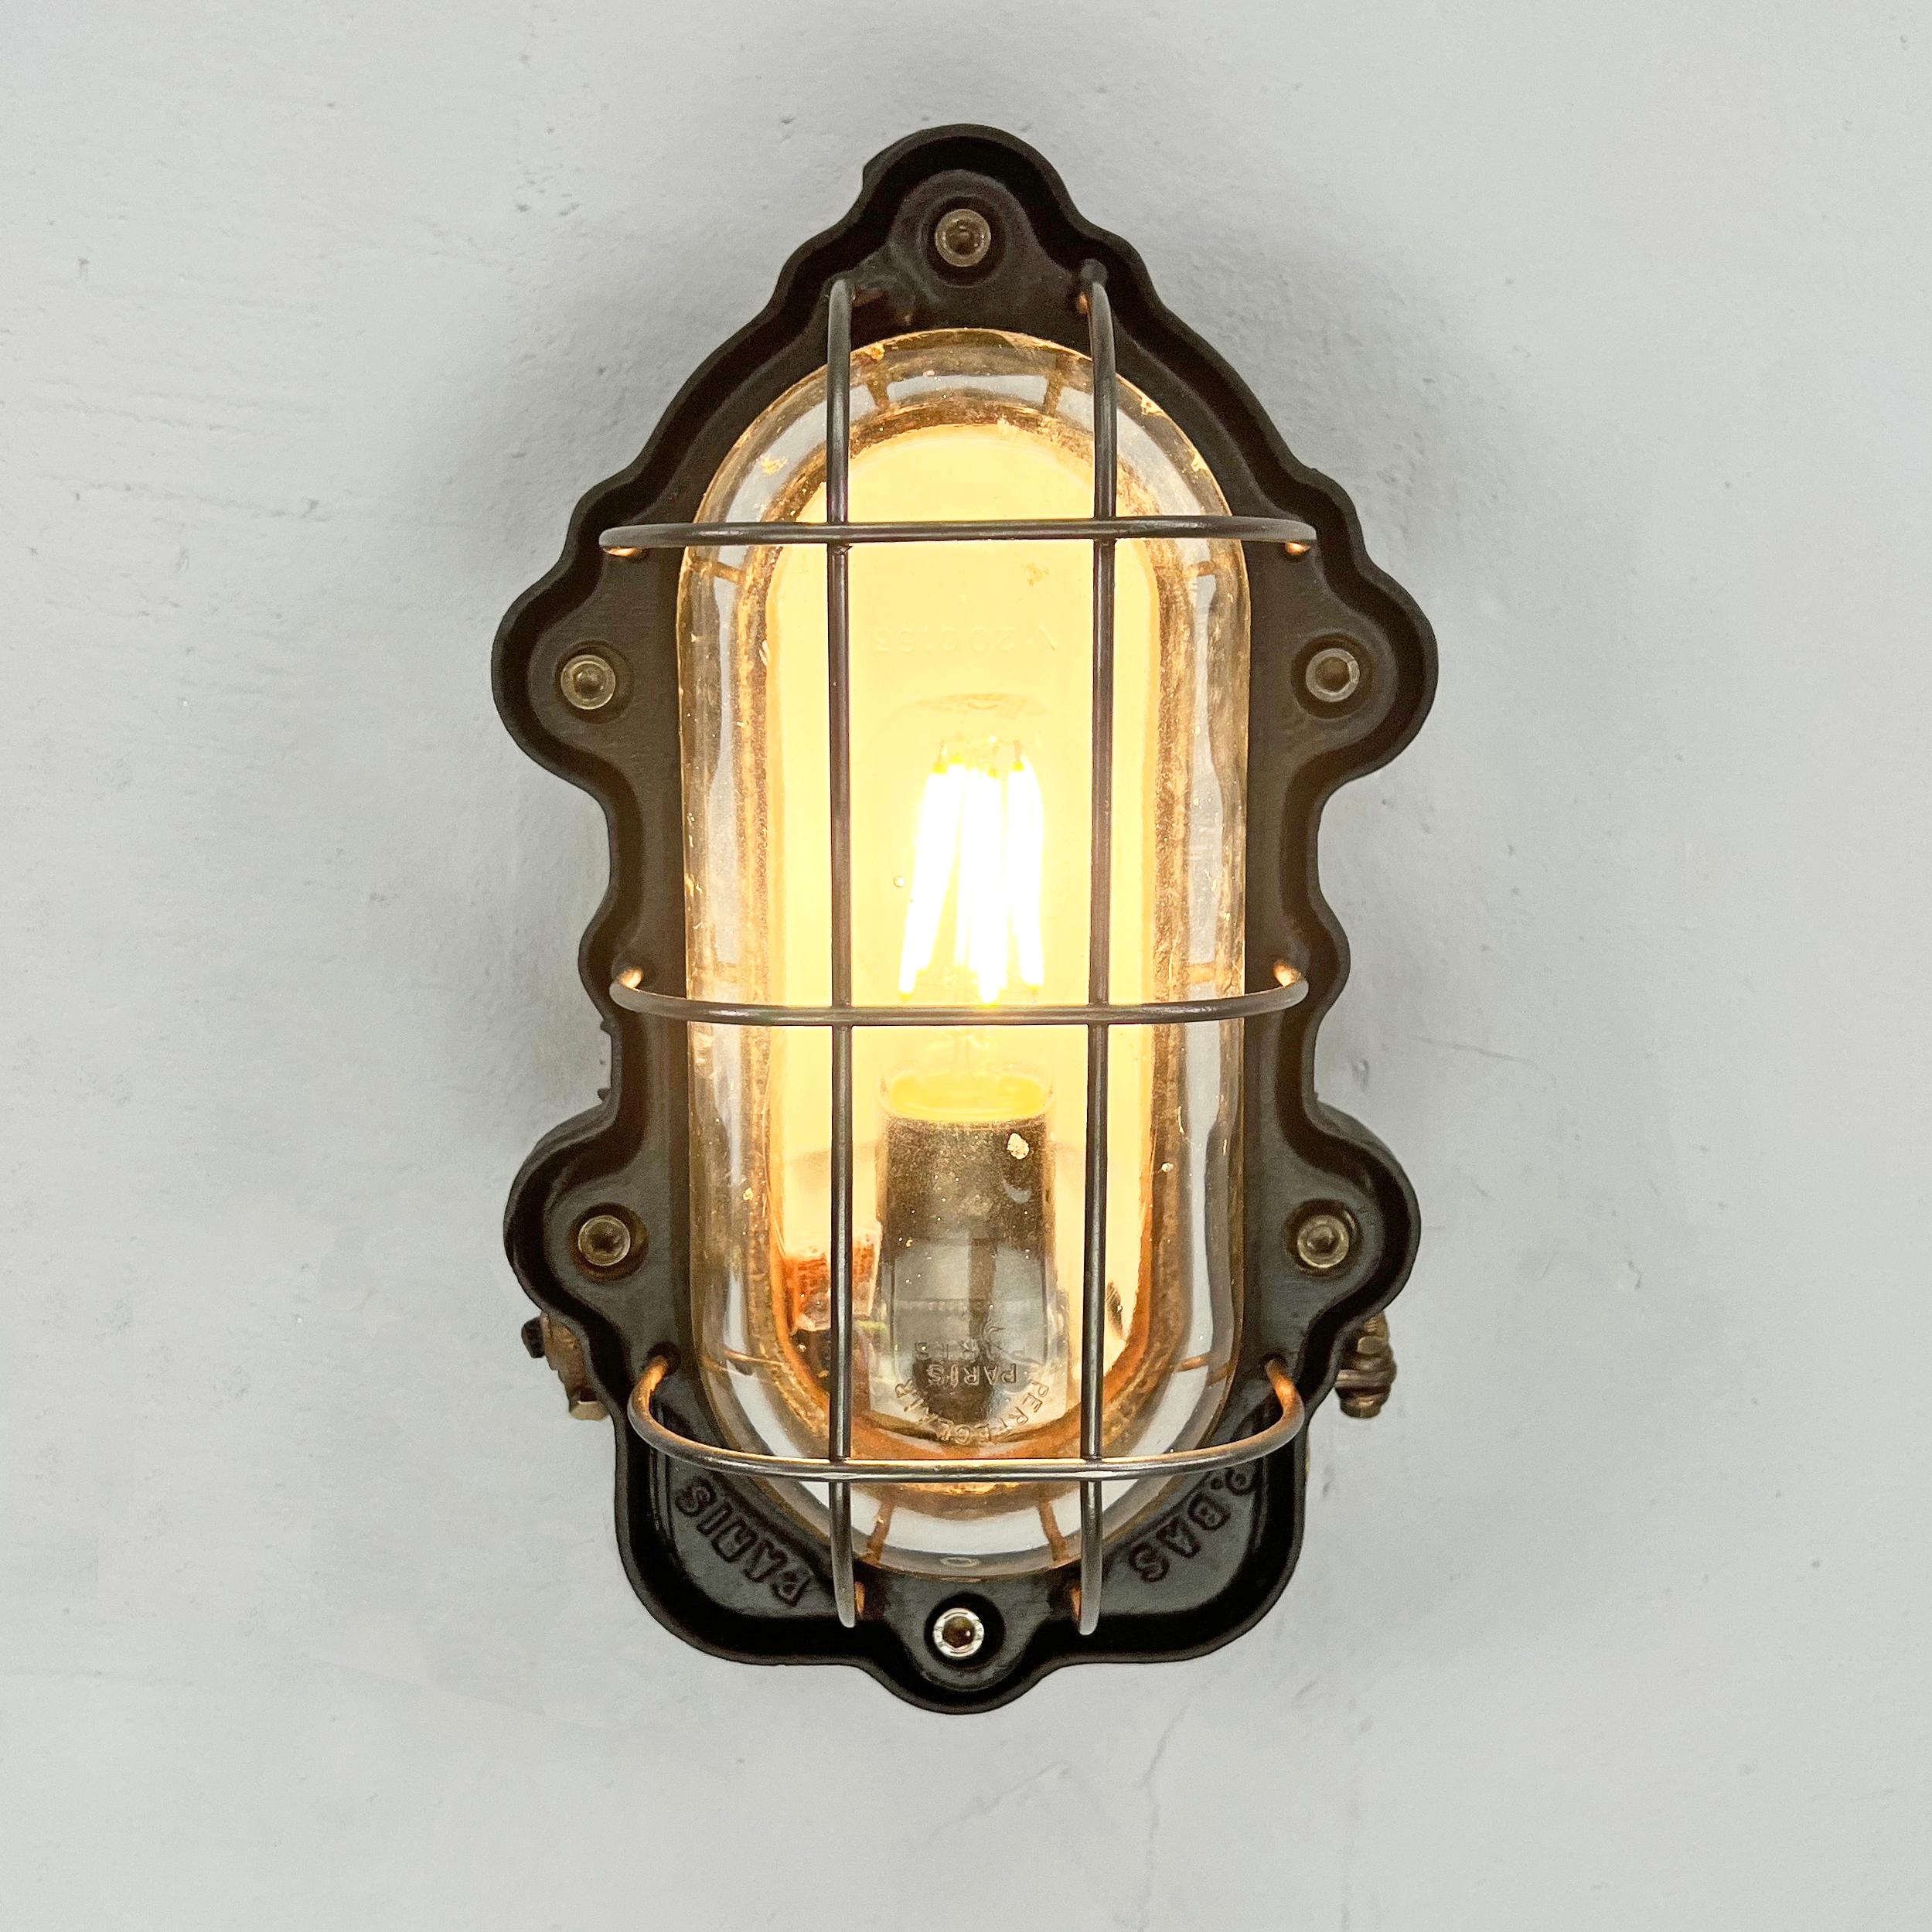 1950's French Oval Black Cast Steel Bulkhead Light by Perfeclair of Paris For Sale 1